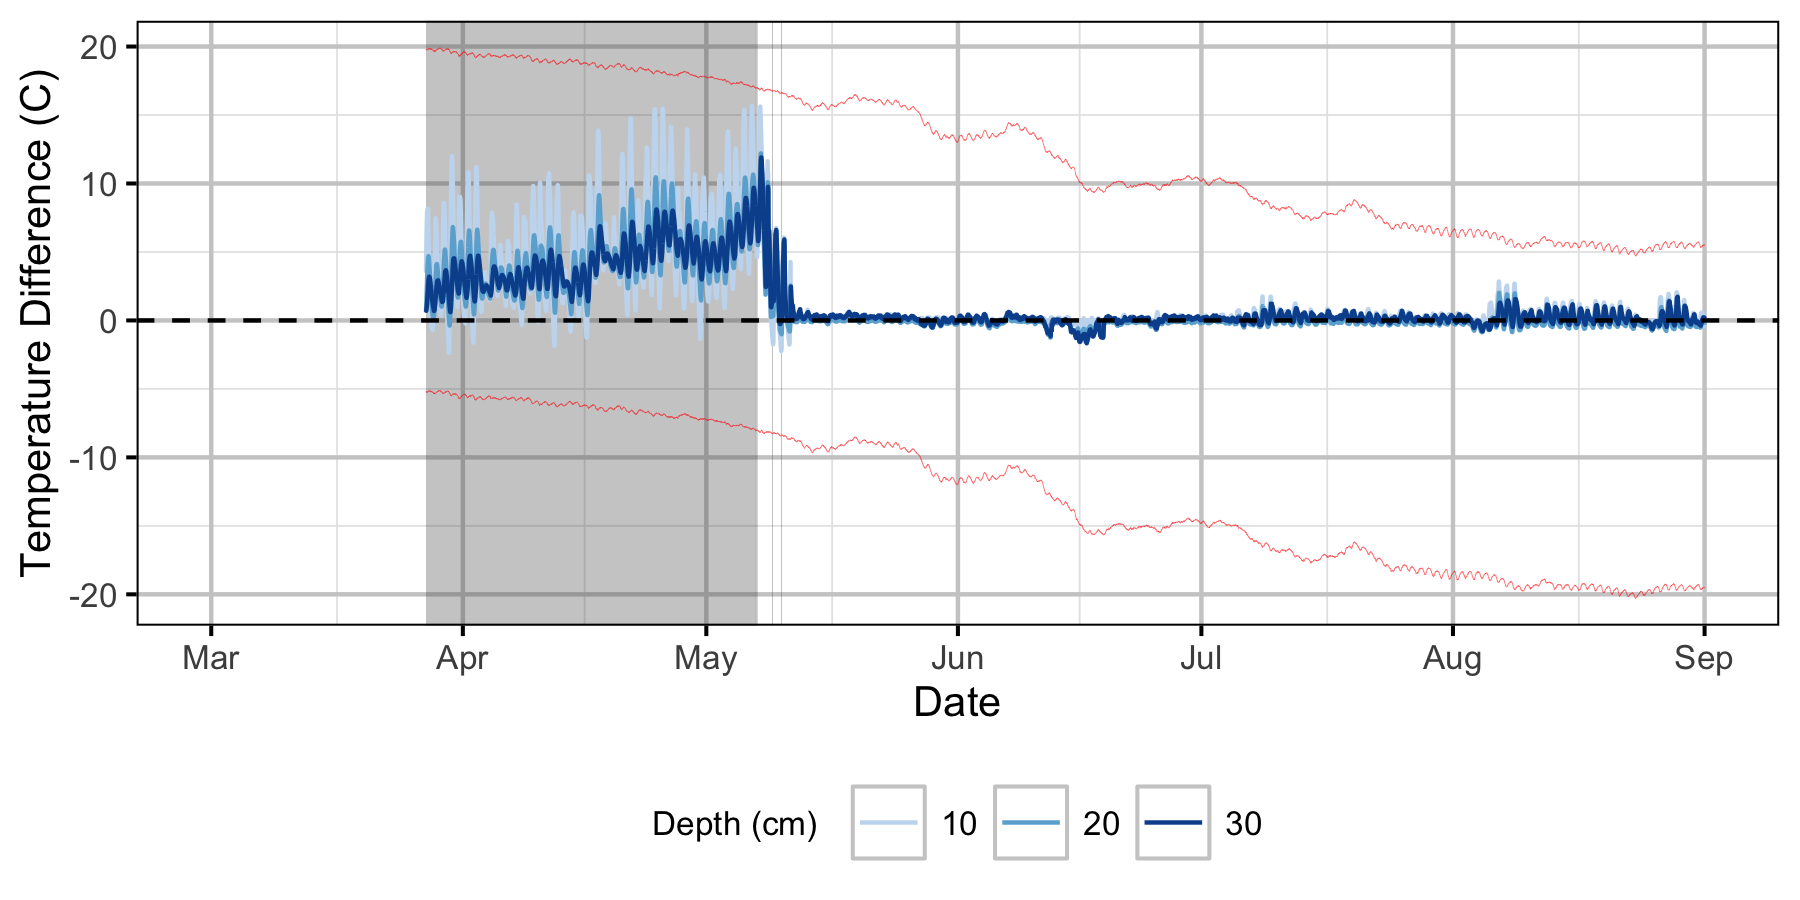 figures/Sensor Data/Relative Gravel Temperature Stations/The Oxbow/Station15.png